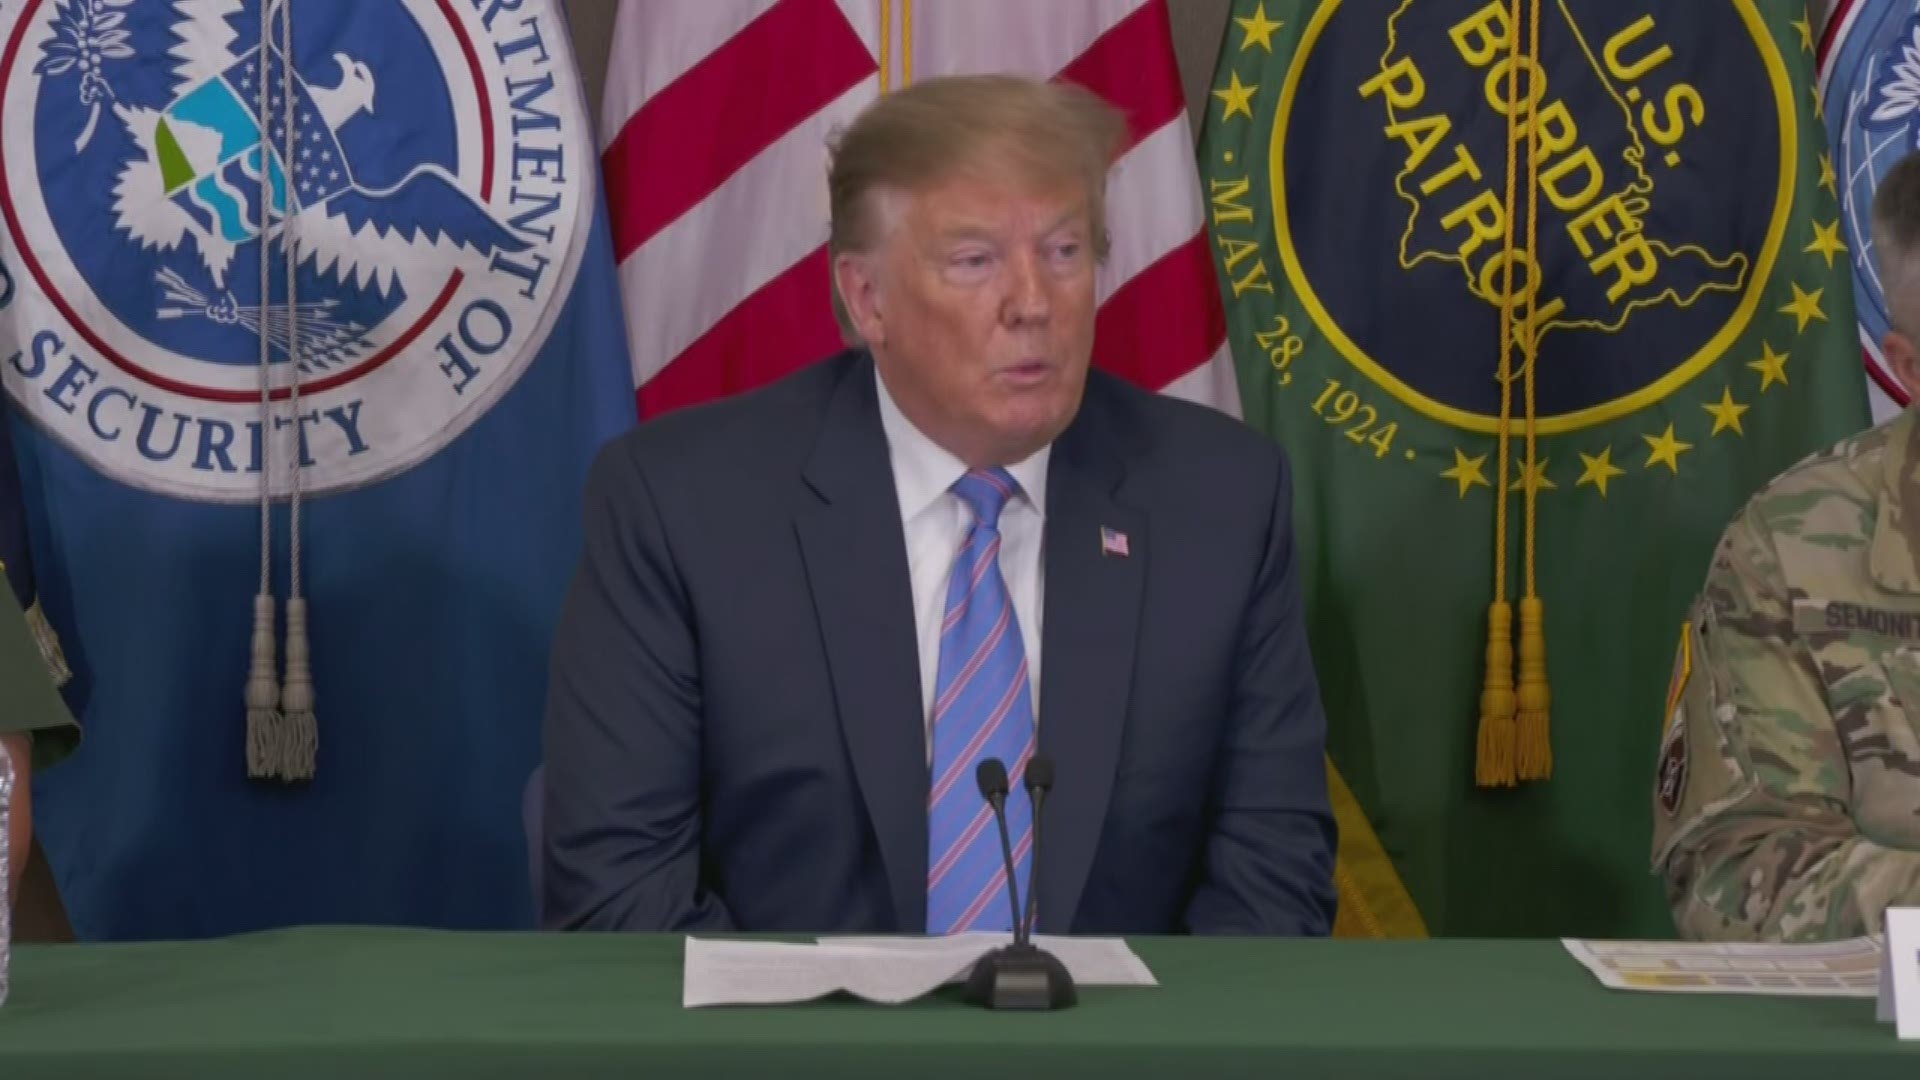 During remarks before touring the U.S.-Mexico border, President Donald Trump said his new statement to immigrants is that the 'system is full.'